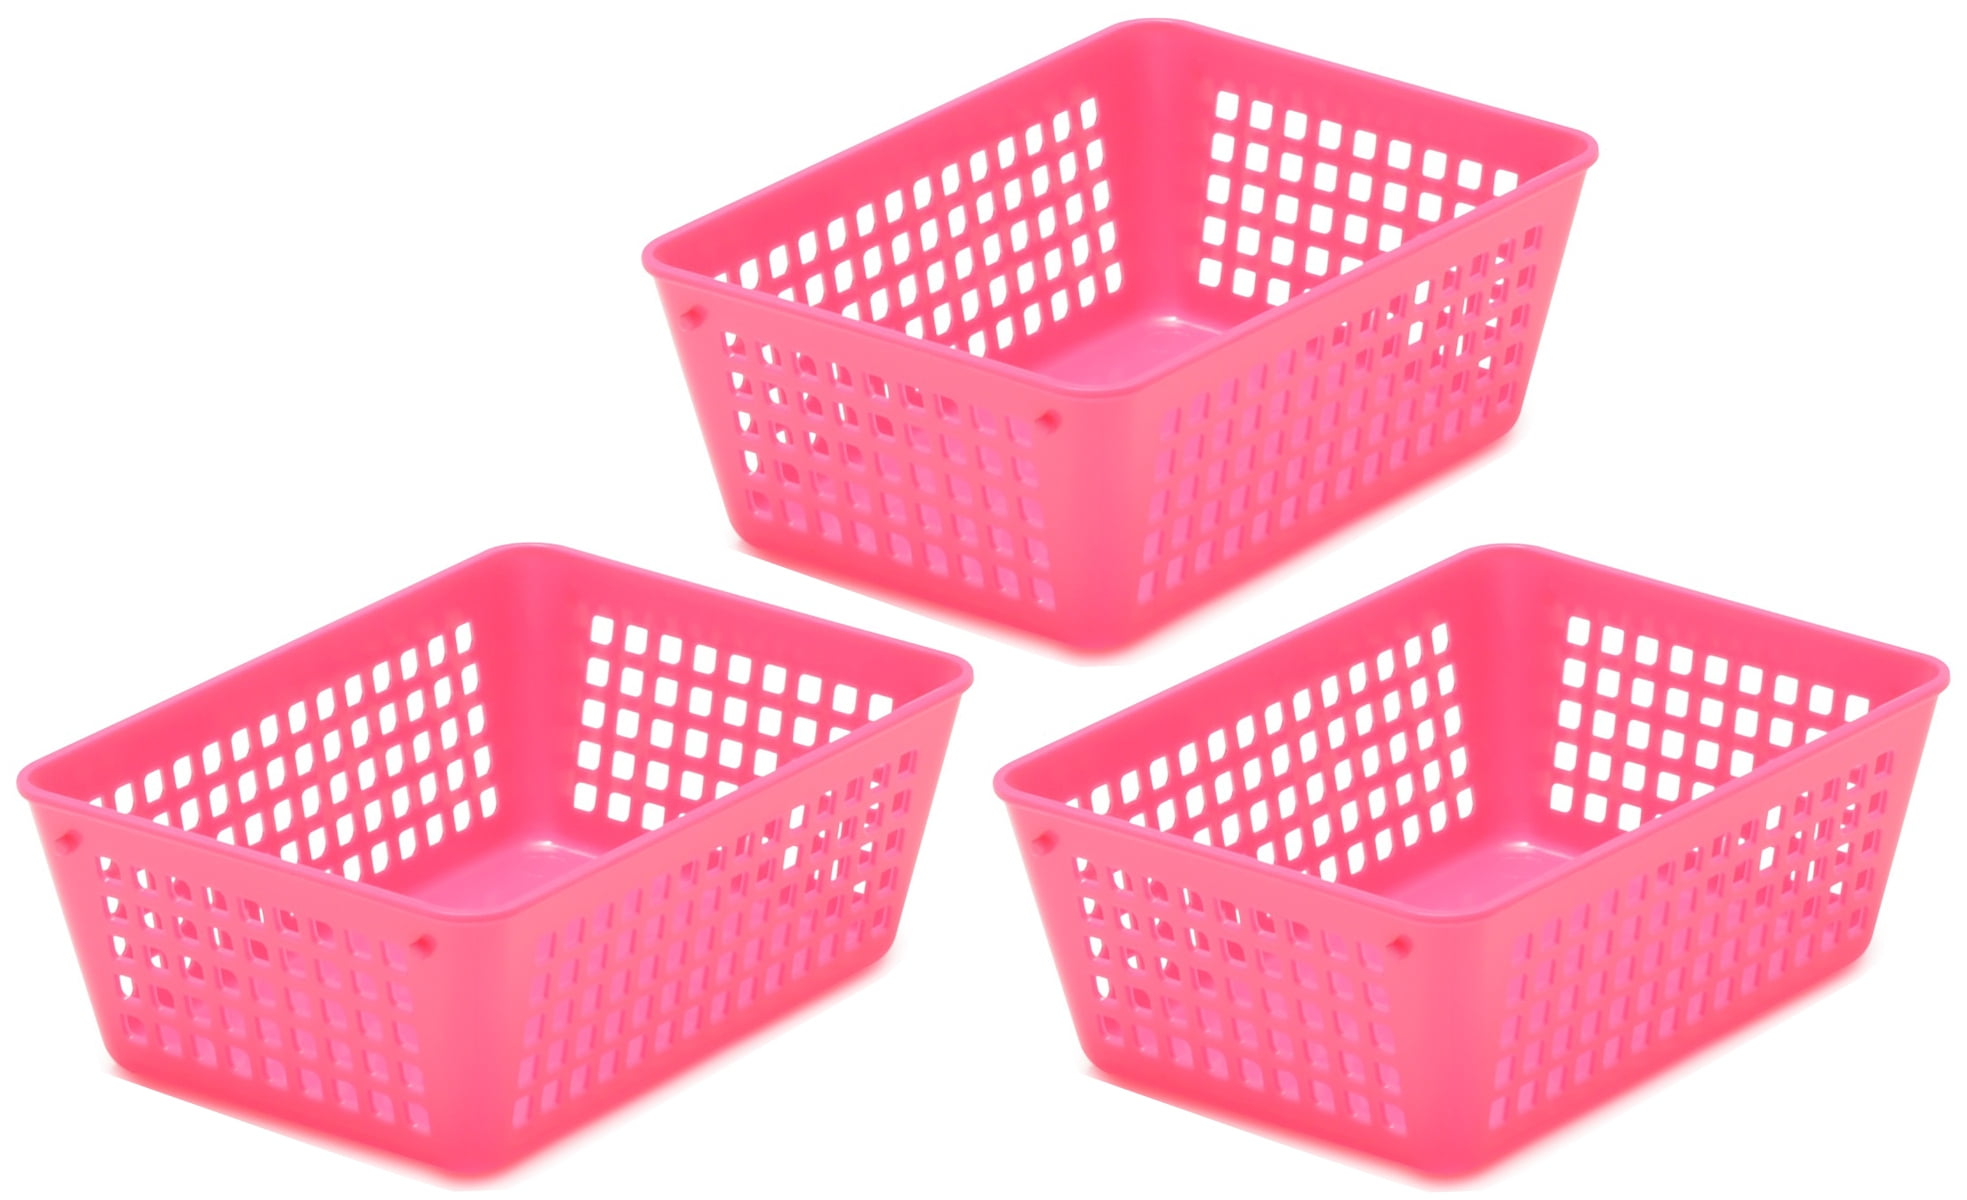 nicexmas 4pcs Small Plastic Baskets with Handles for Bathroom Kitchen Playroom Shopping, Size: 6.3 x 5.12 x 3.46